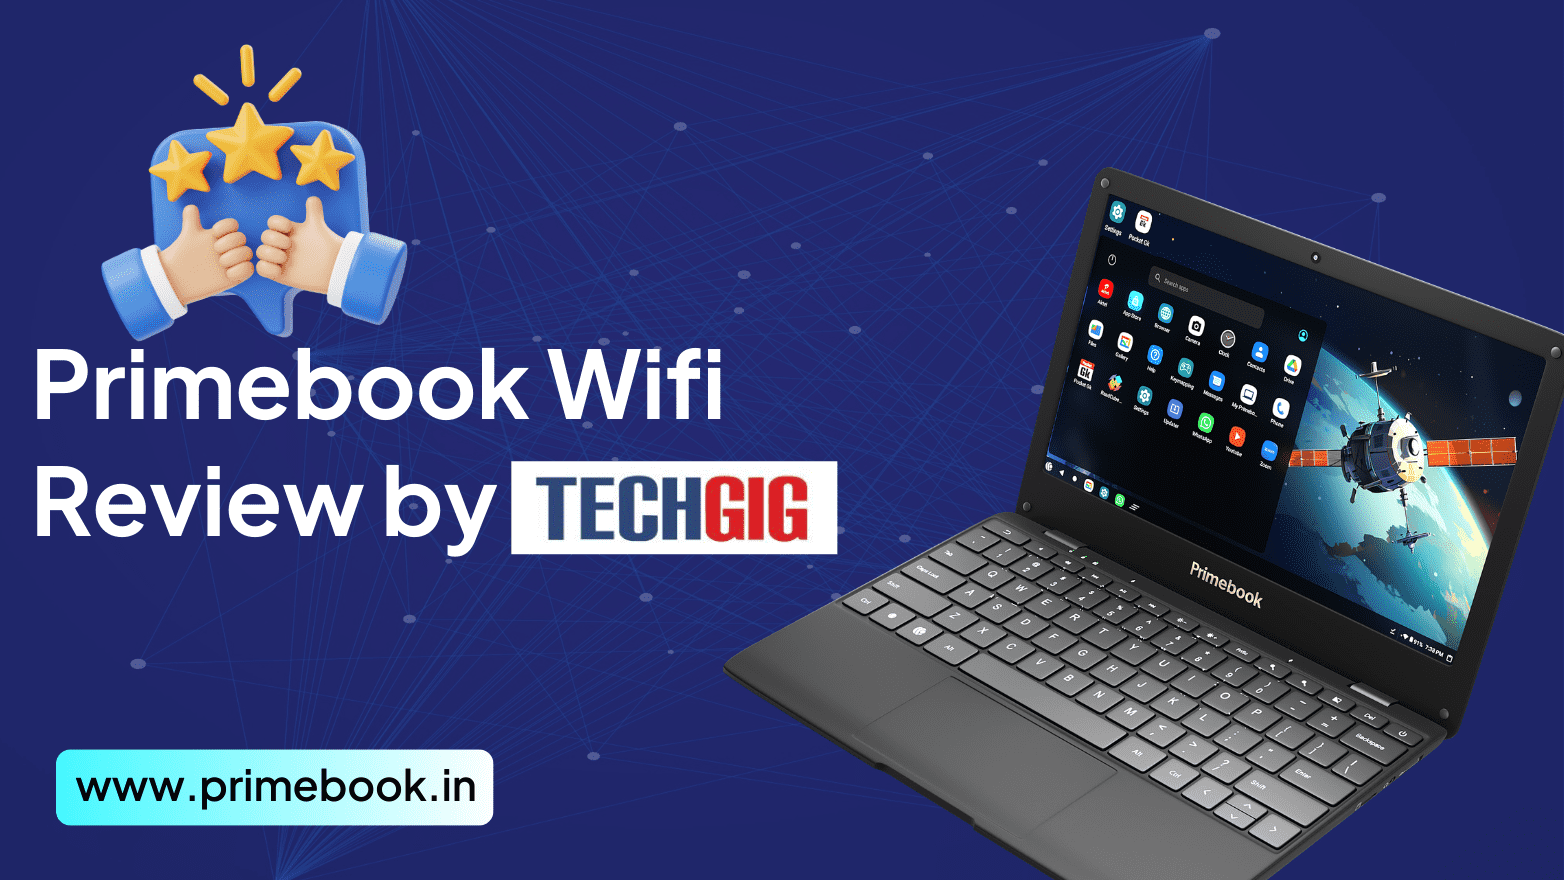 Primebook Wifi Laptop Review By TECHGIG: A Brief! 